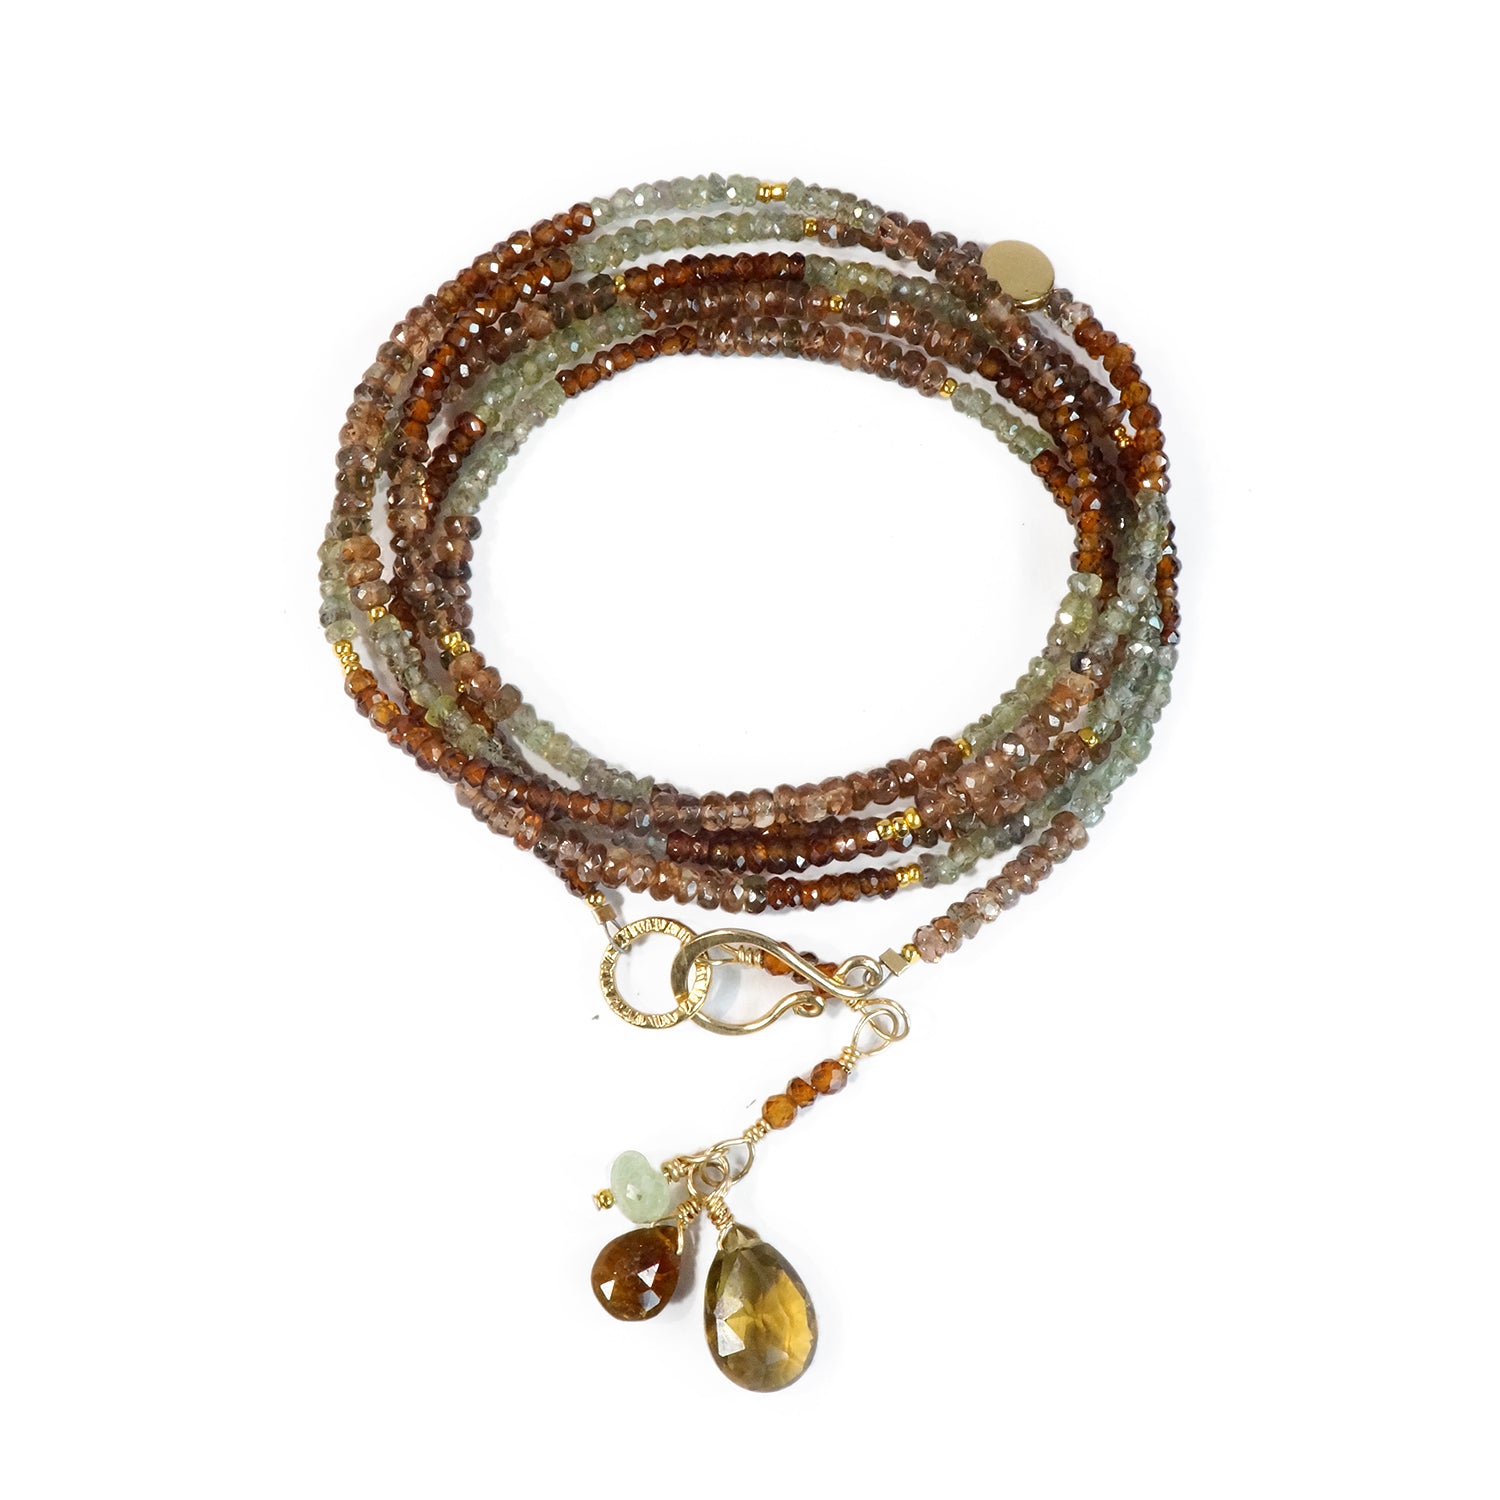 Multi Gemstone Necklace/Wrapped Bracelet with Andalusite and Green Sapphire in Gold